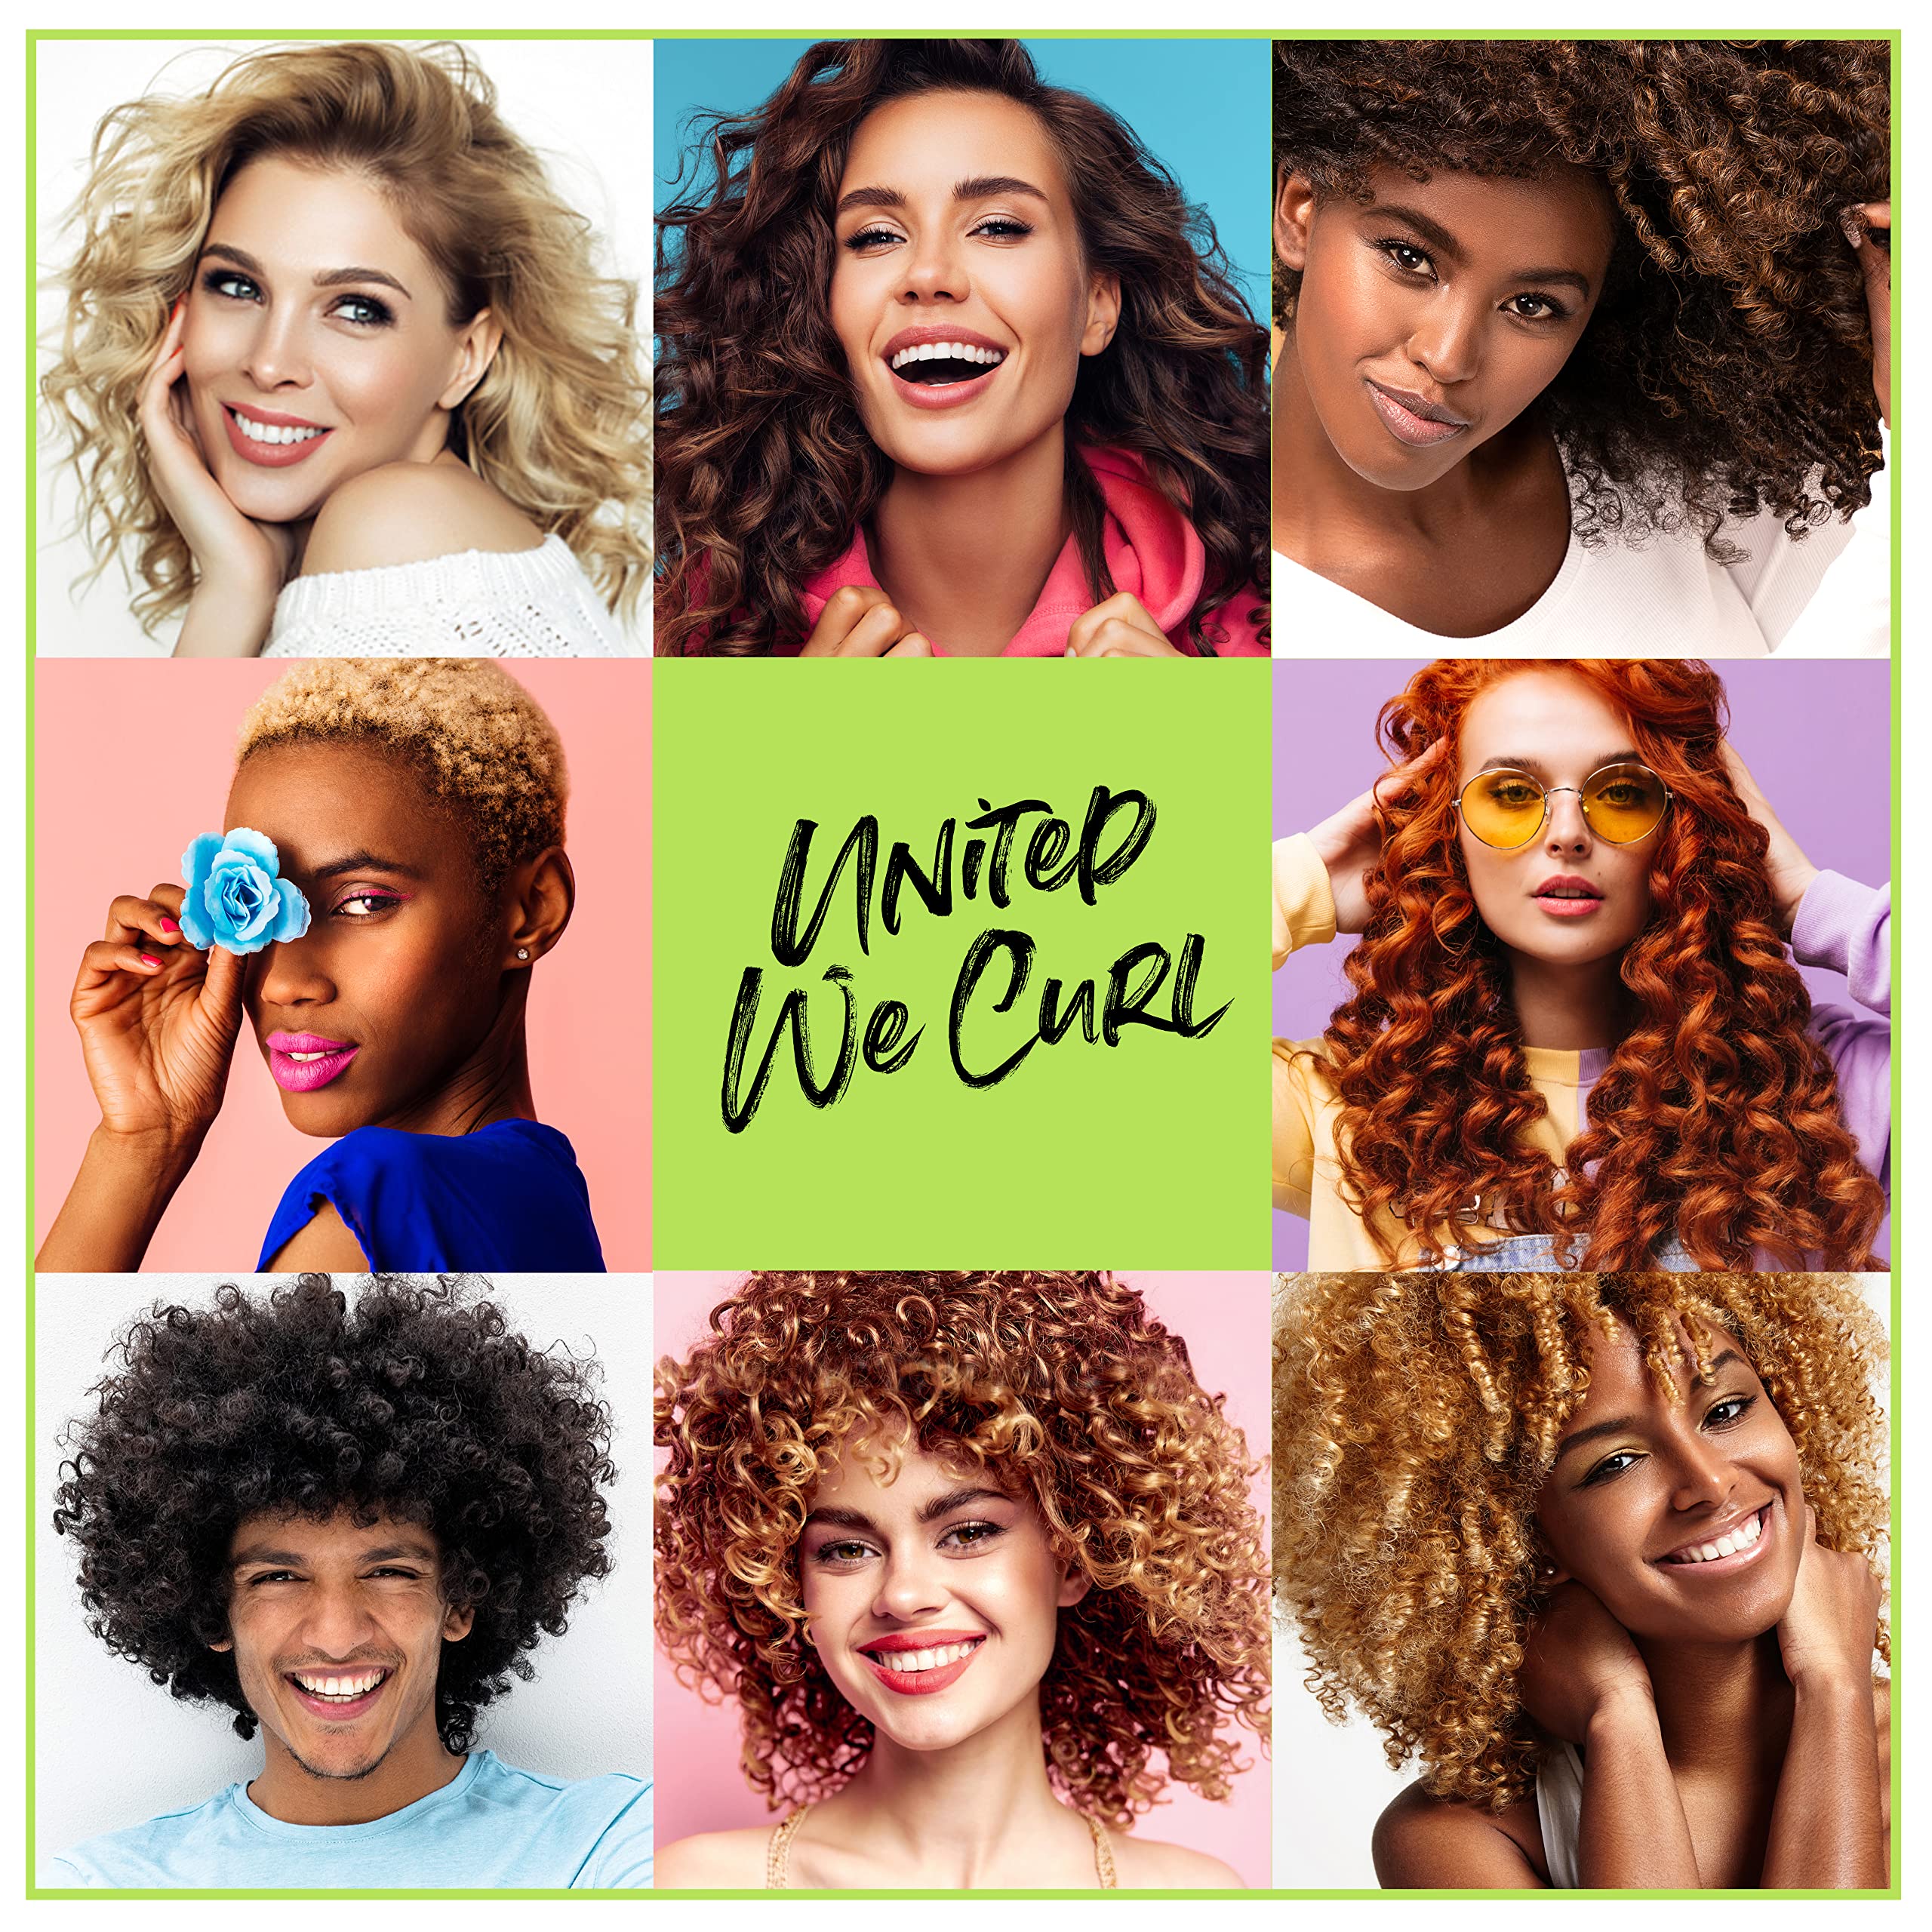 All About Curls Permanent Hair Color Dye | 100% Gray Coverage | Vibrant Color & Shine | All Curly Hair Types